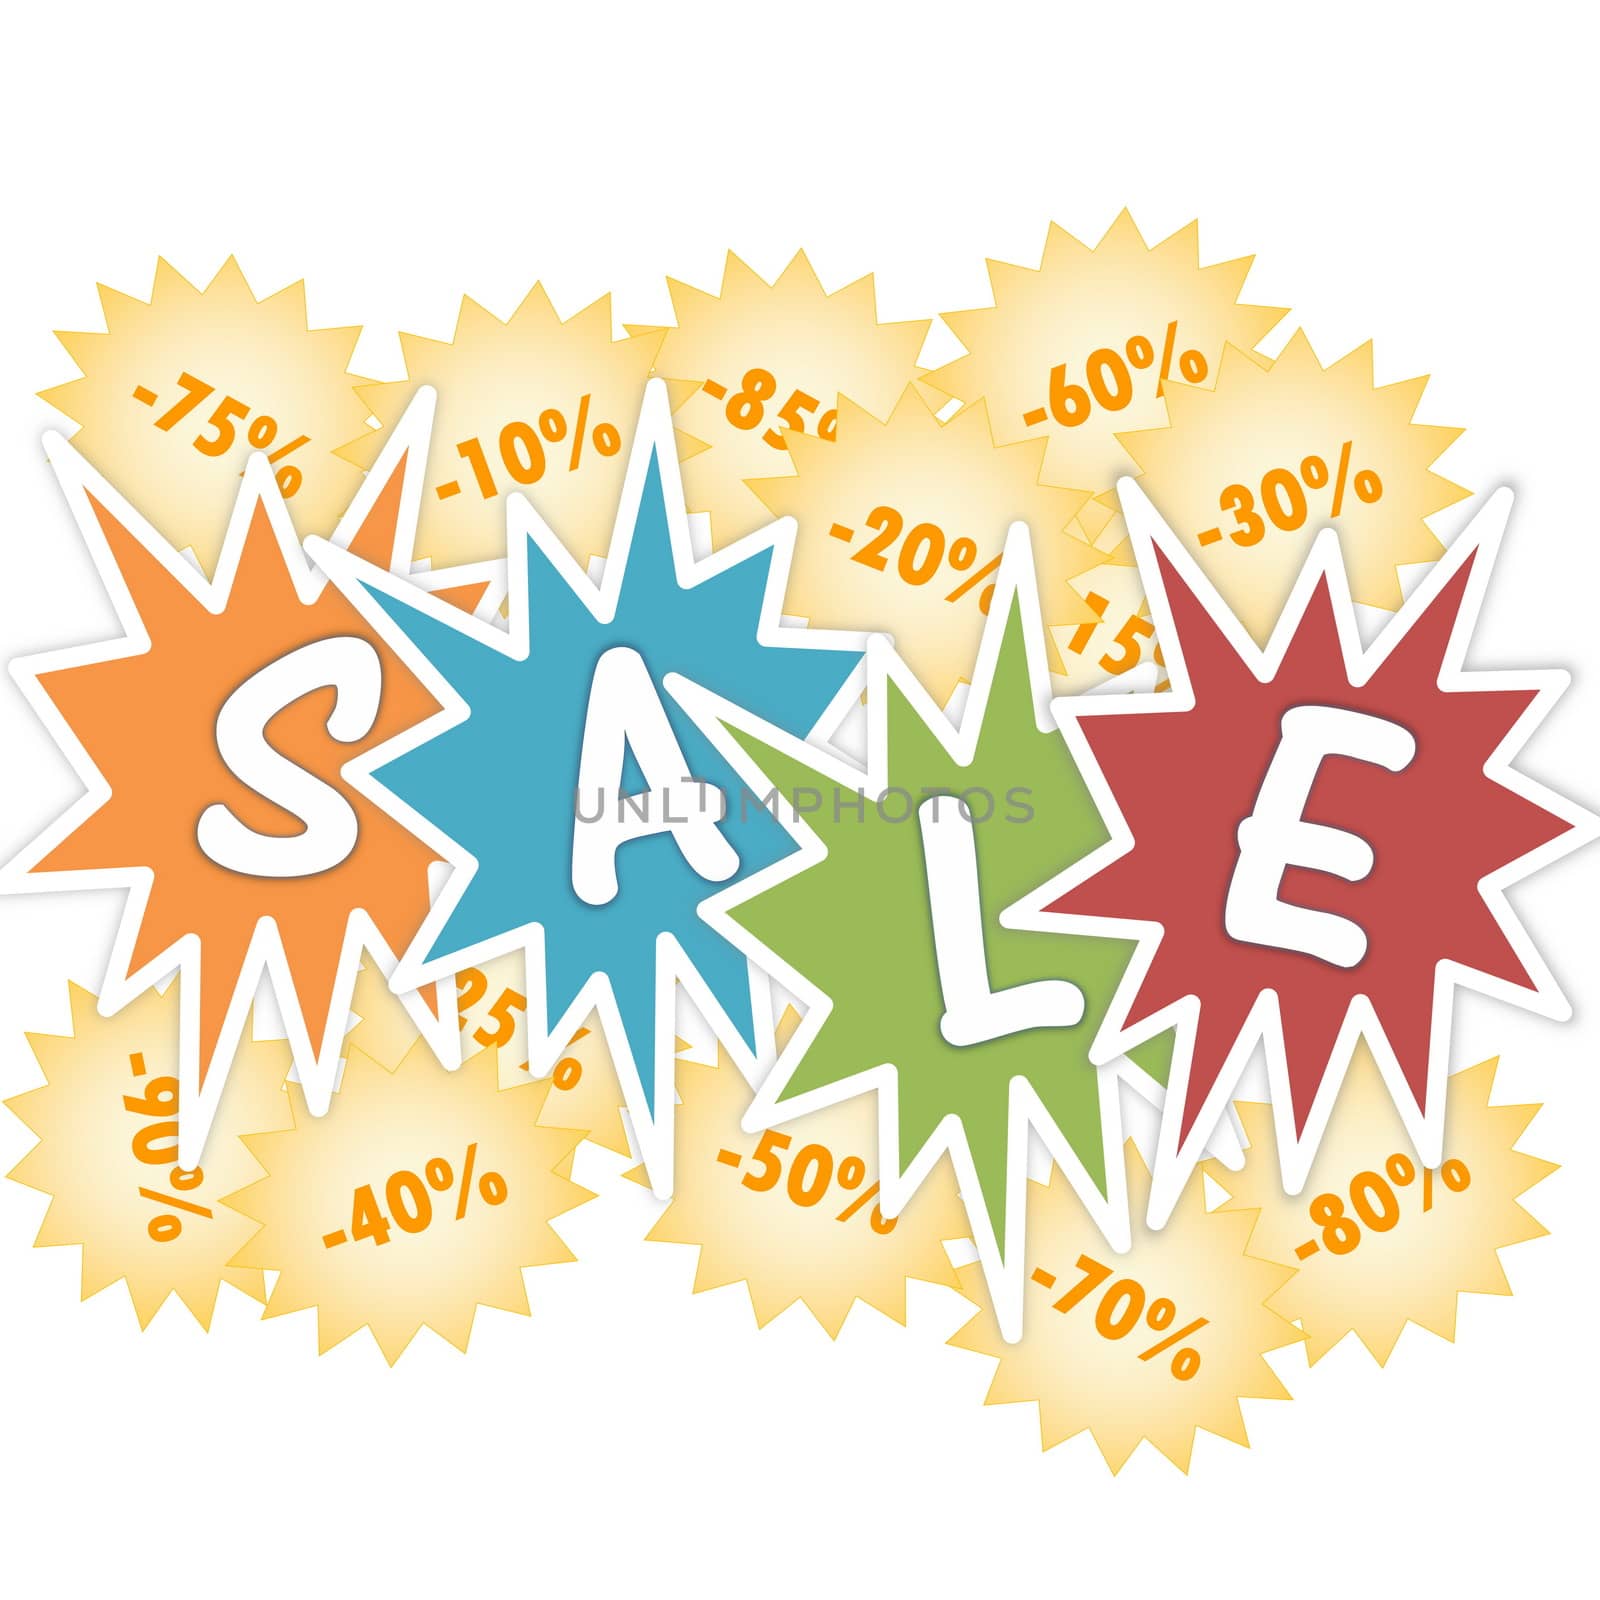 Sale and percentage discounts in white background